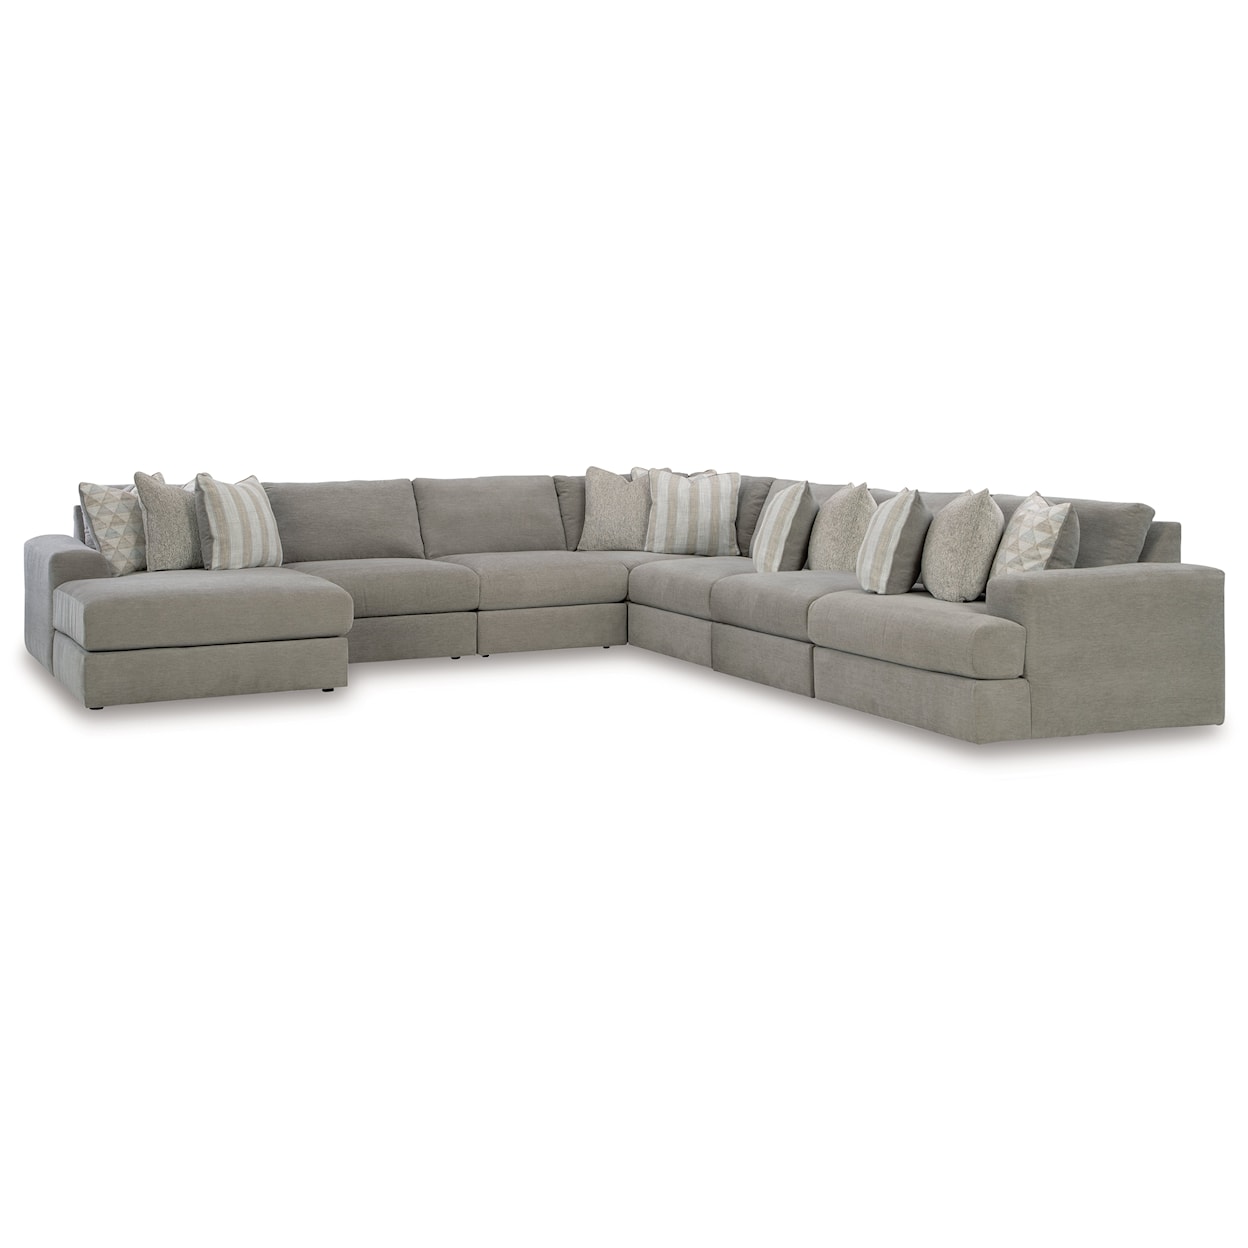 Benchcraft Avaliyah 7-Piece Sectional with Chaise